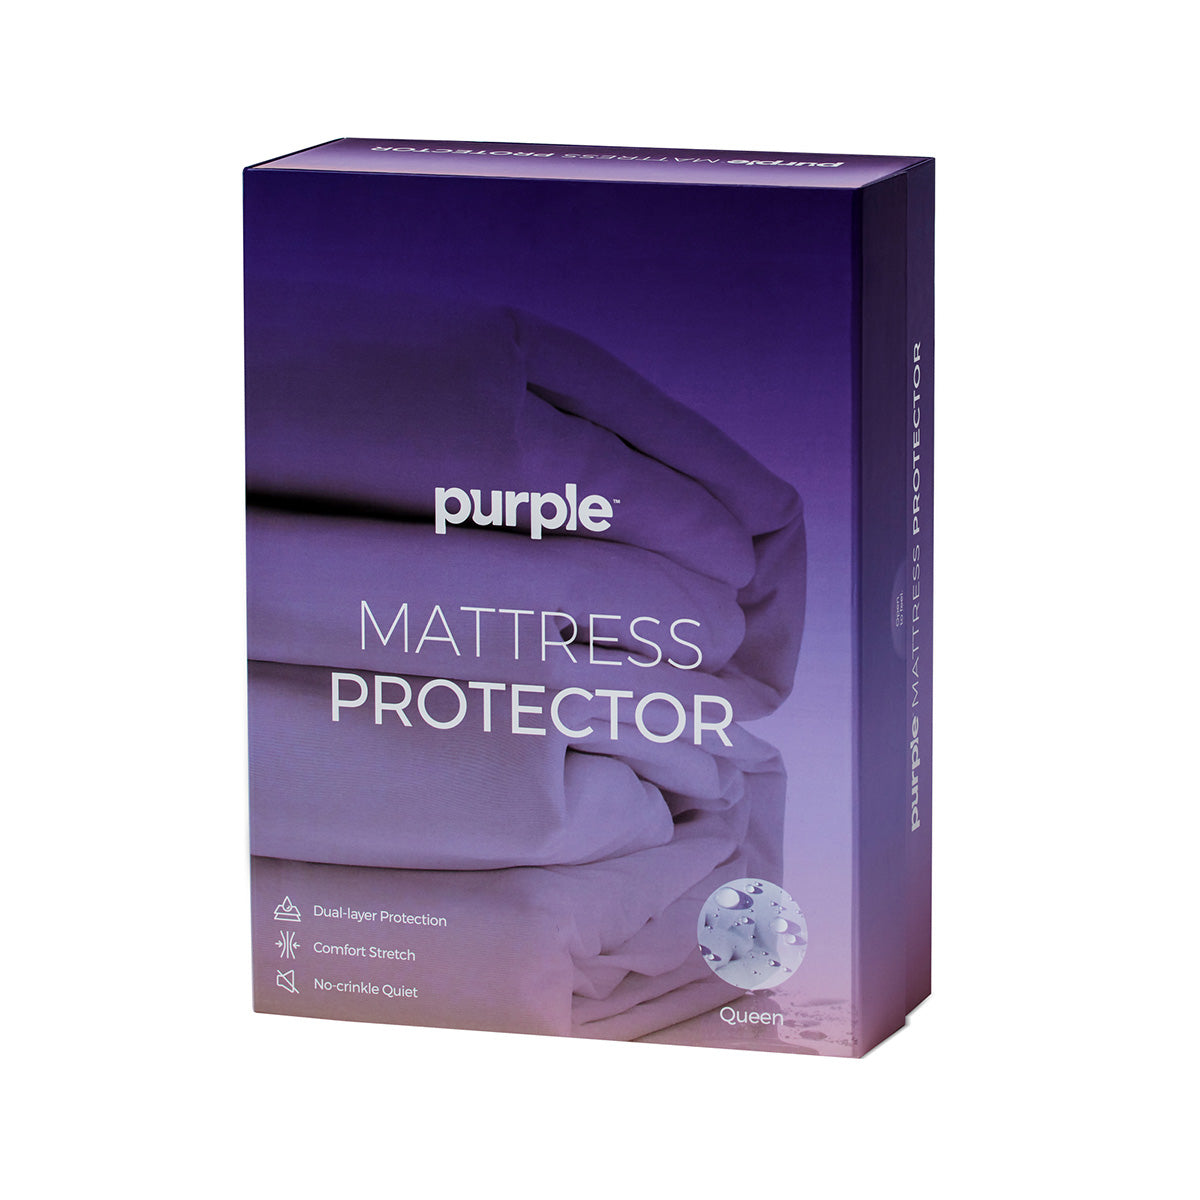 Purple Deep Pocket Mattress Protector Packaging Design With Feature Callouts: Dual-Layer Protection, Comfort Stretch, No-Crinkle Quiet